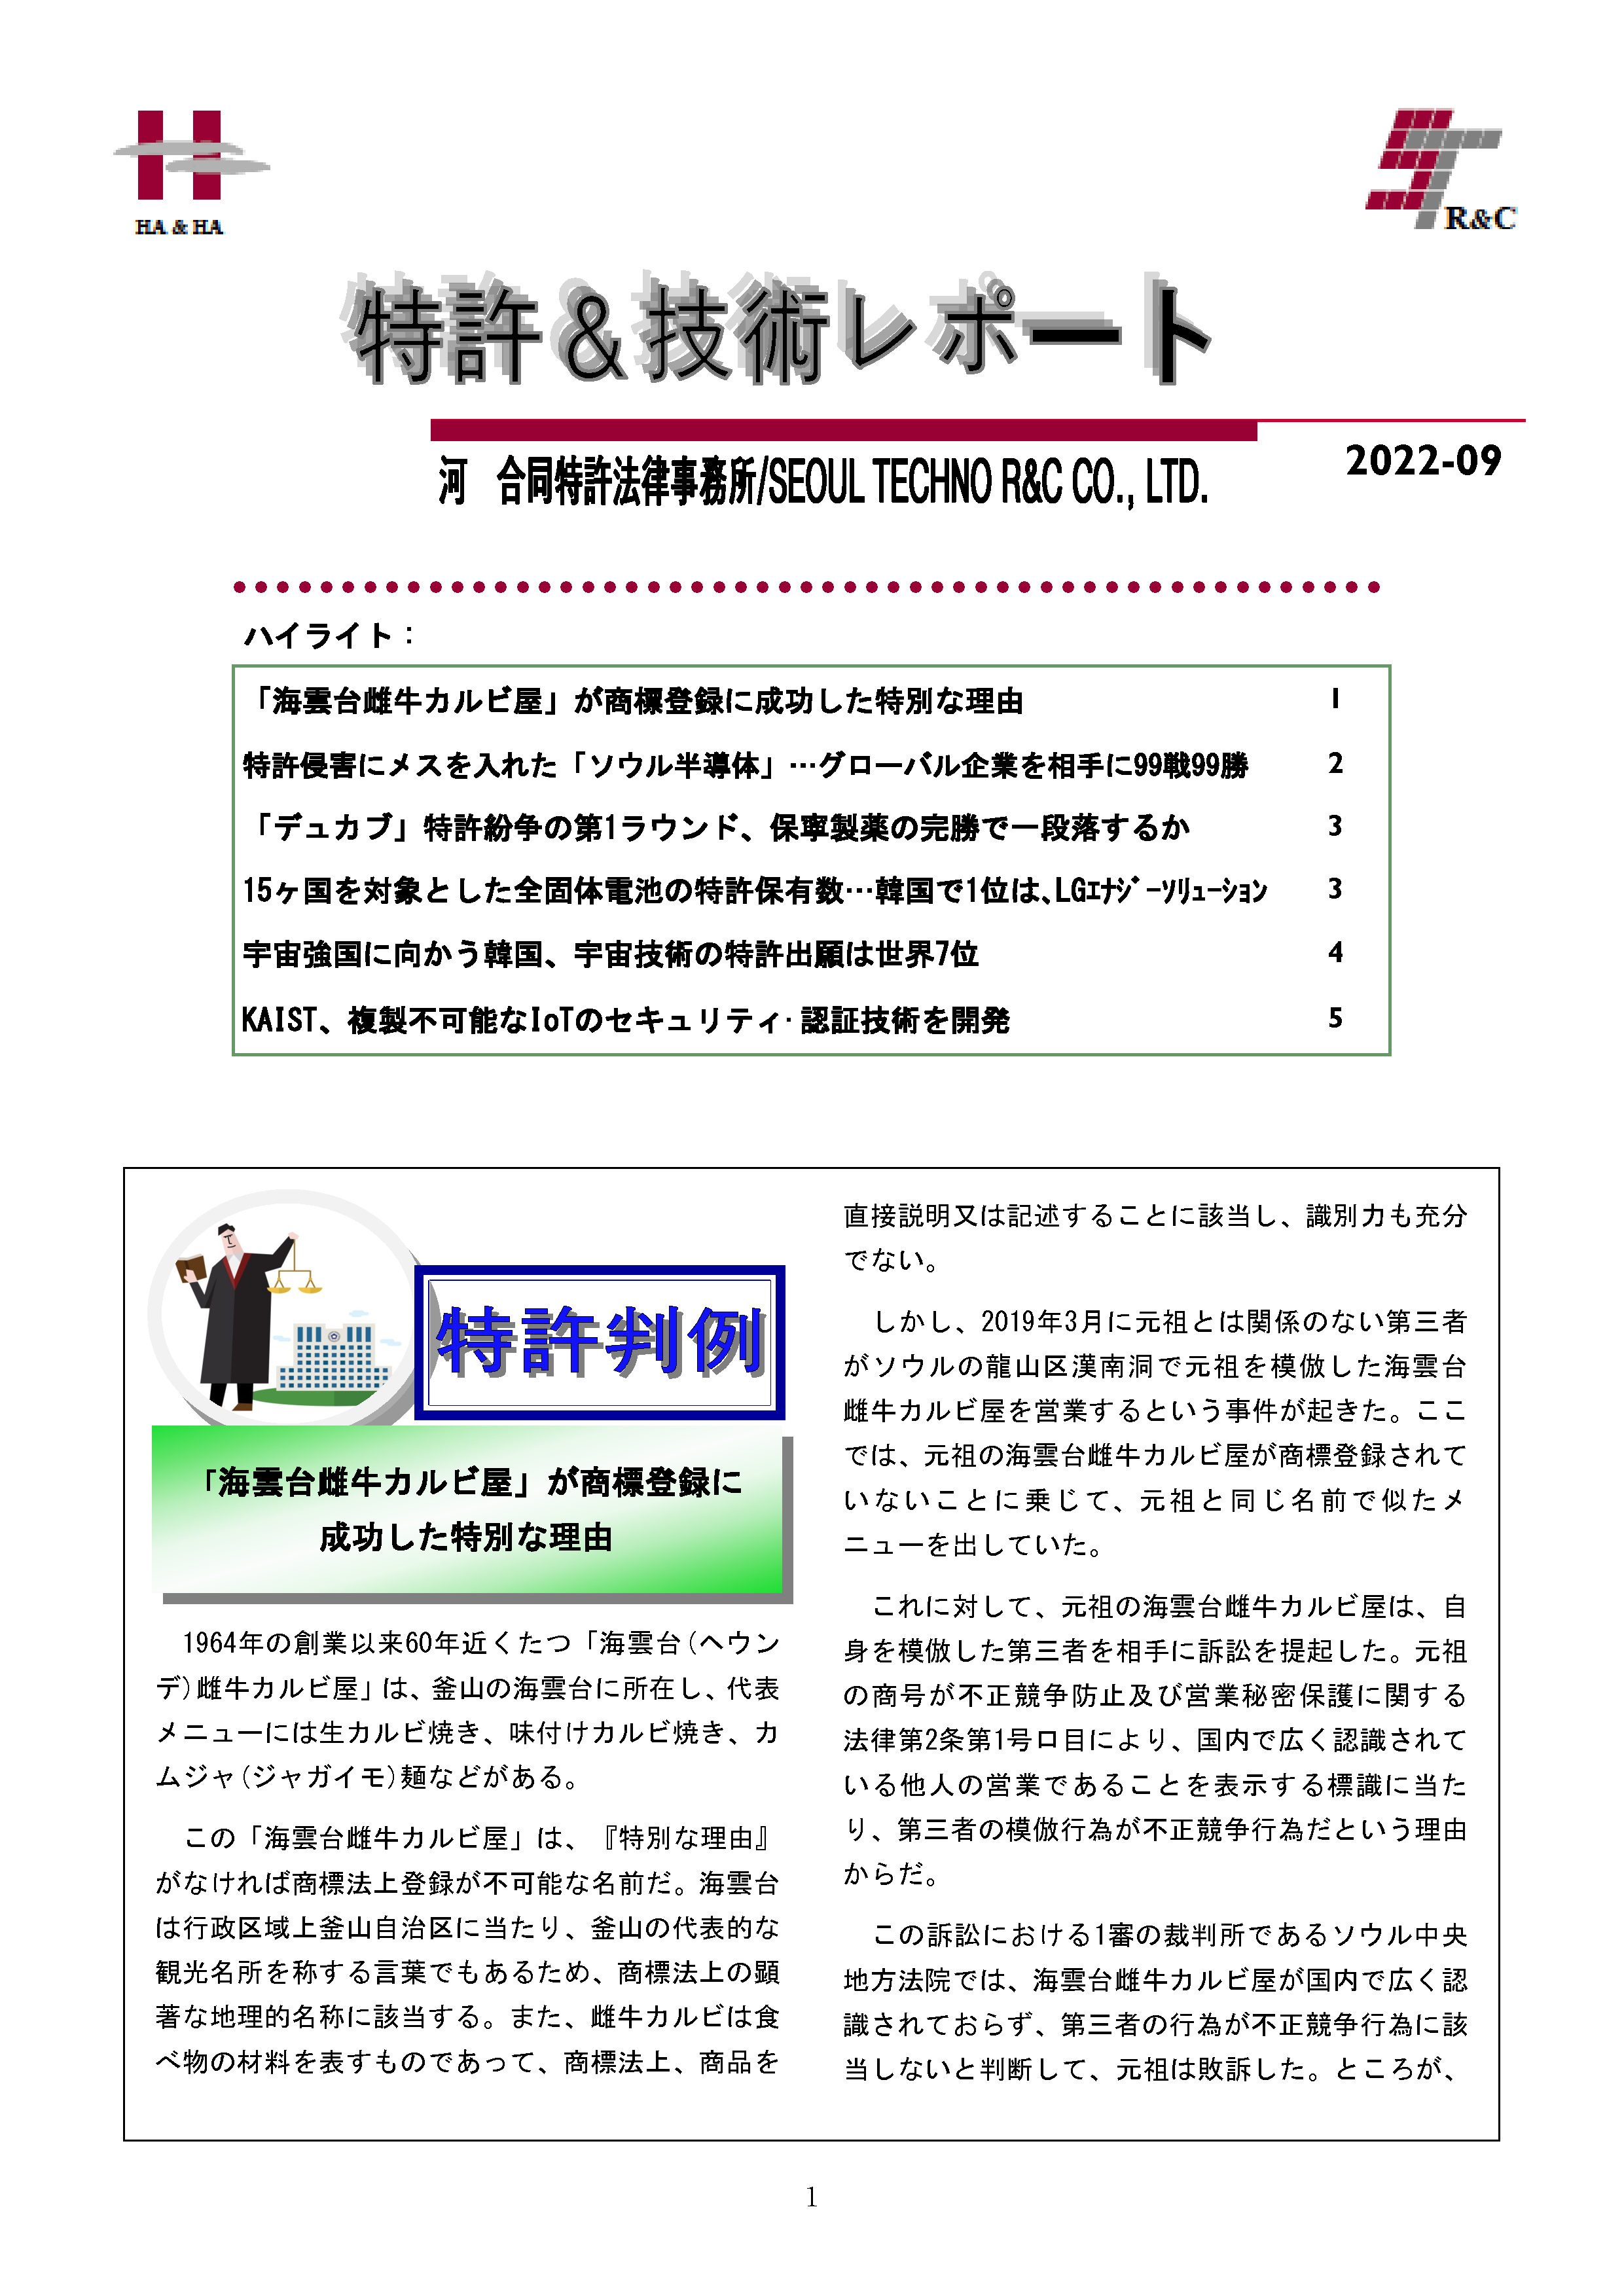 Newsletter_202209_1.png